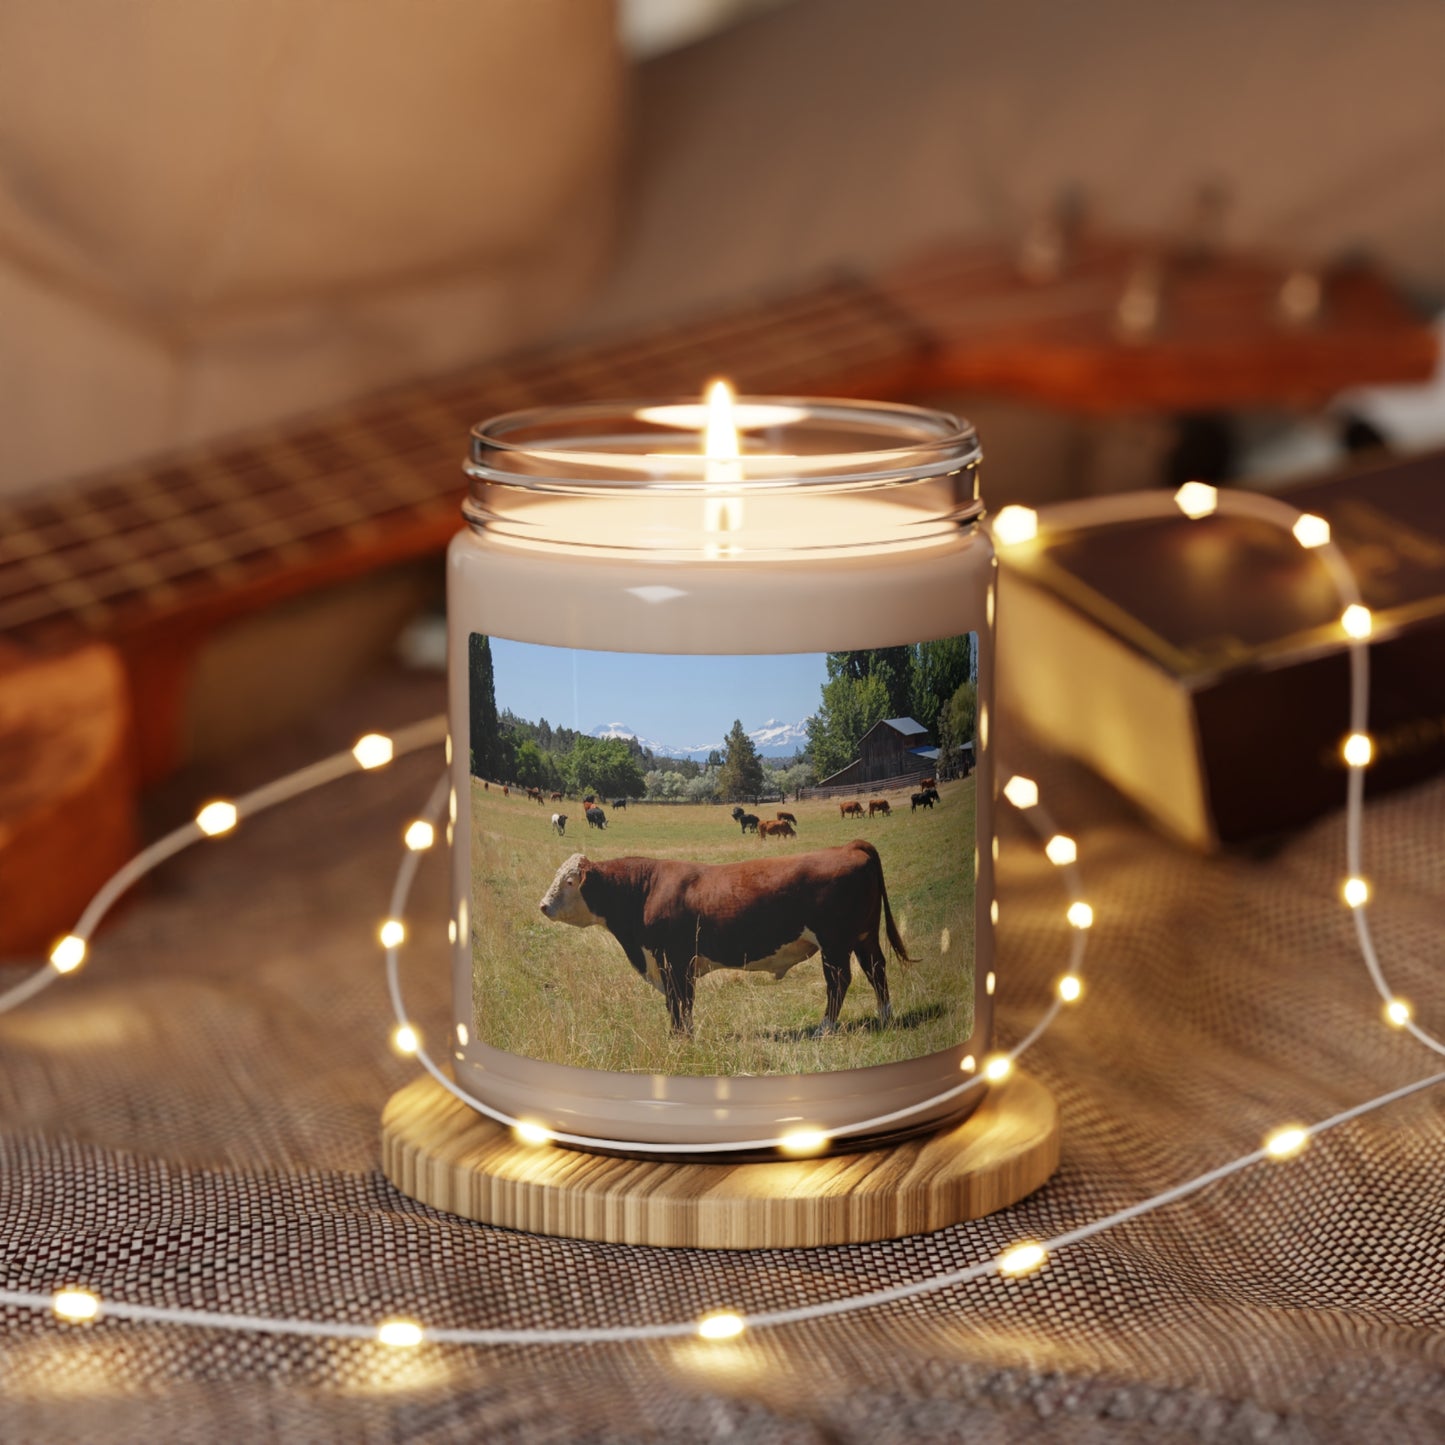 King Of The Pasture Scented Soy Candle, 9oz